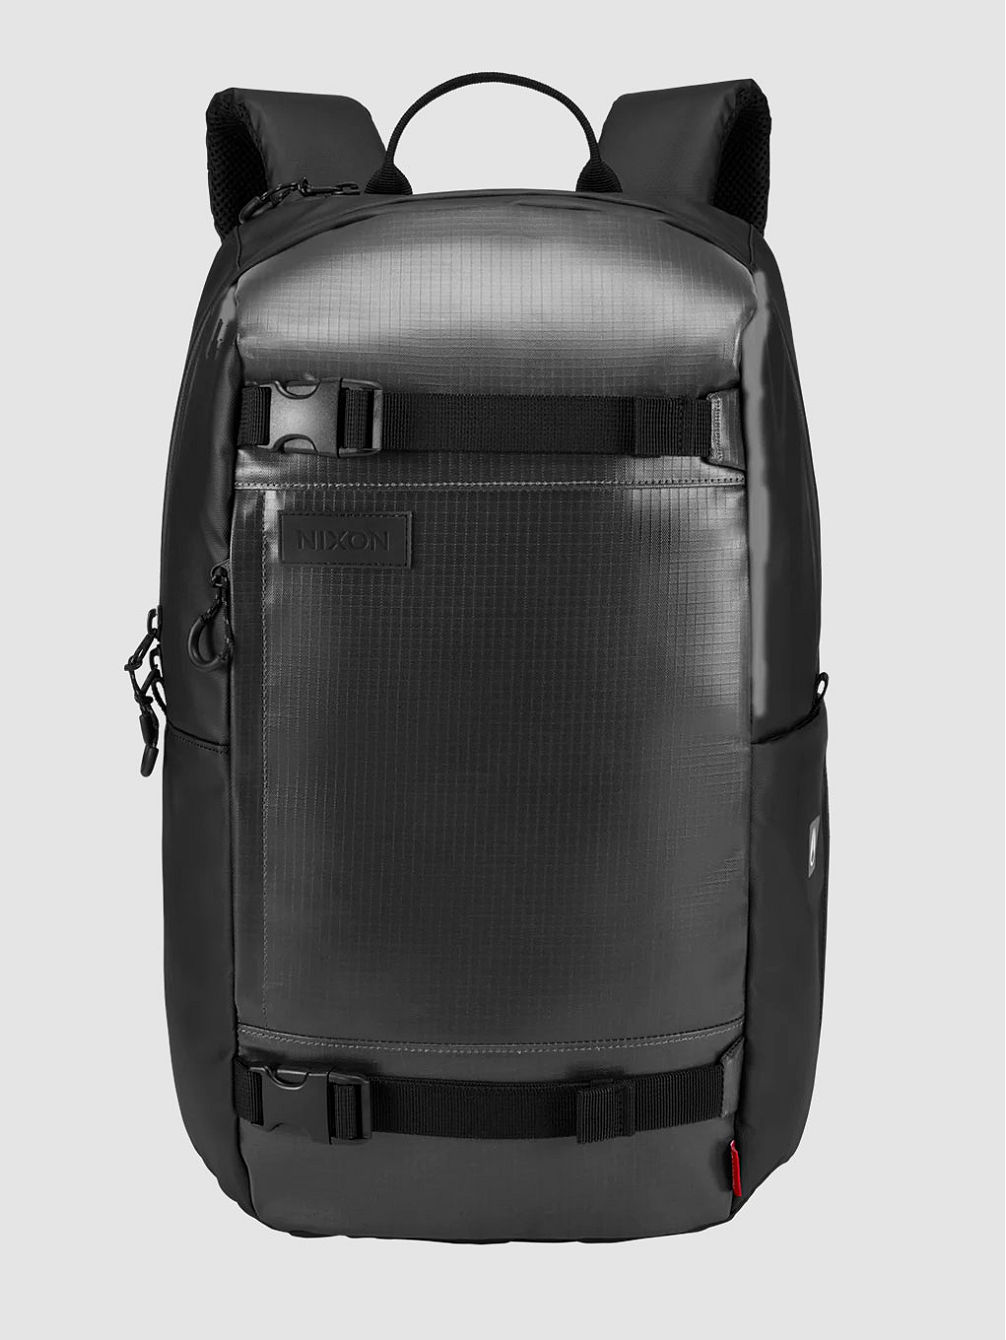 Syndicate Backpack